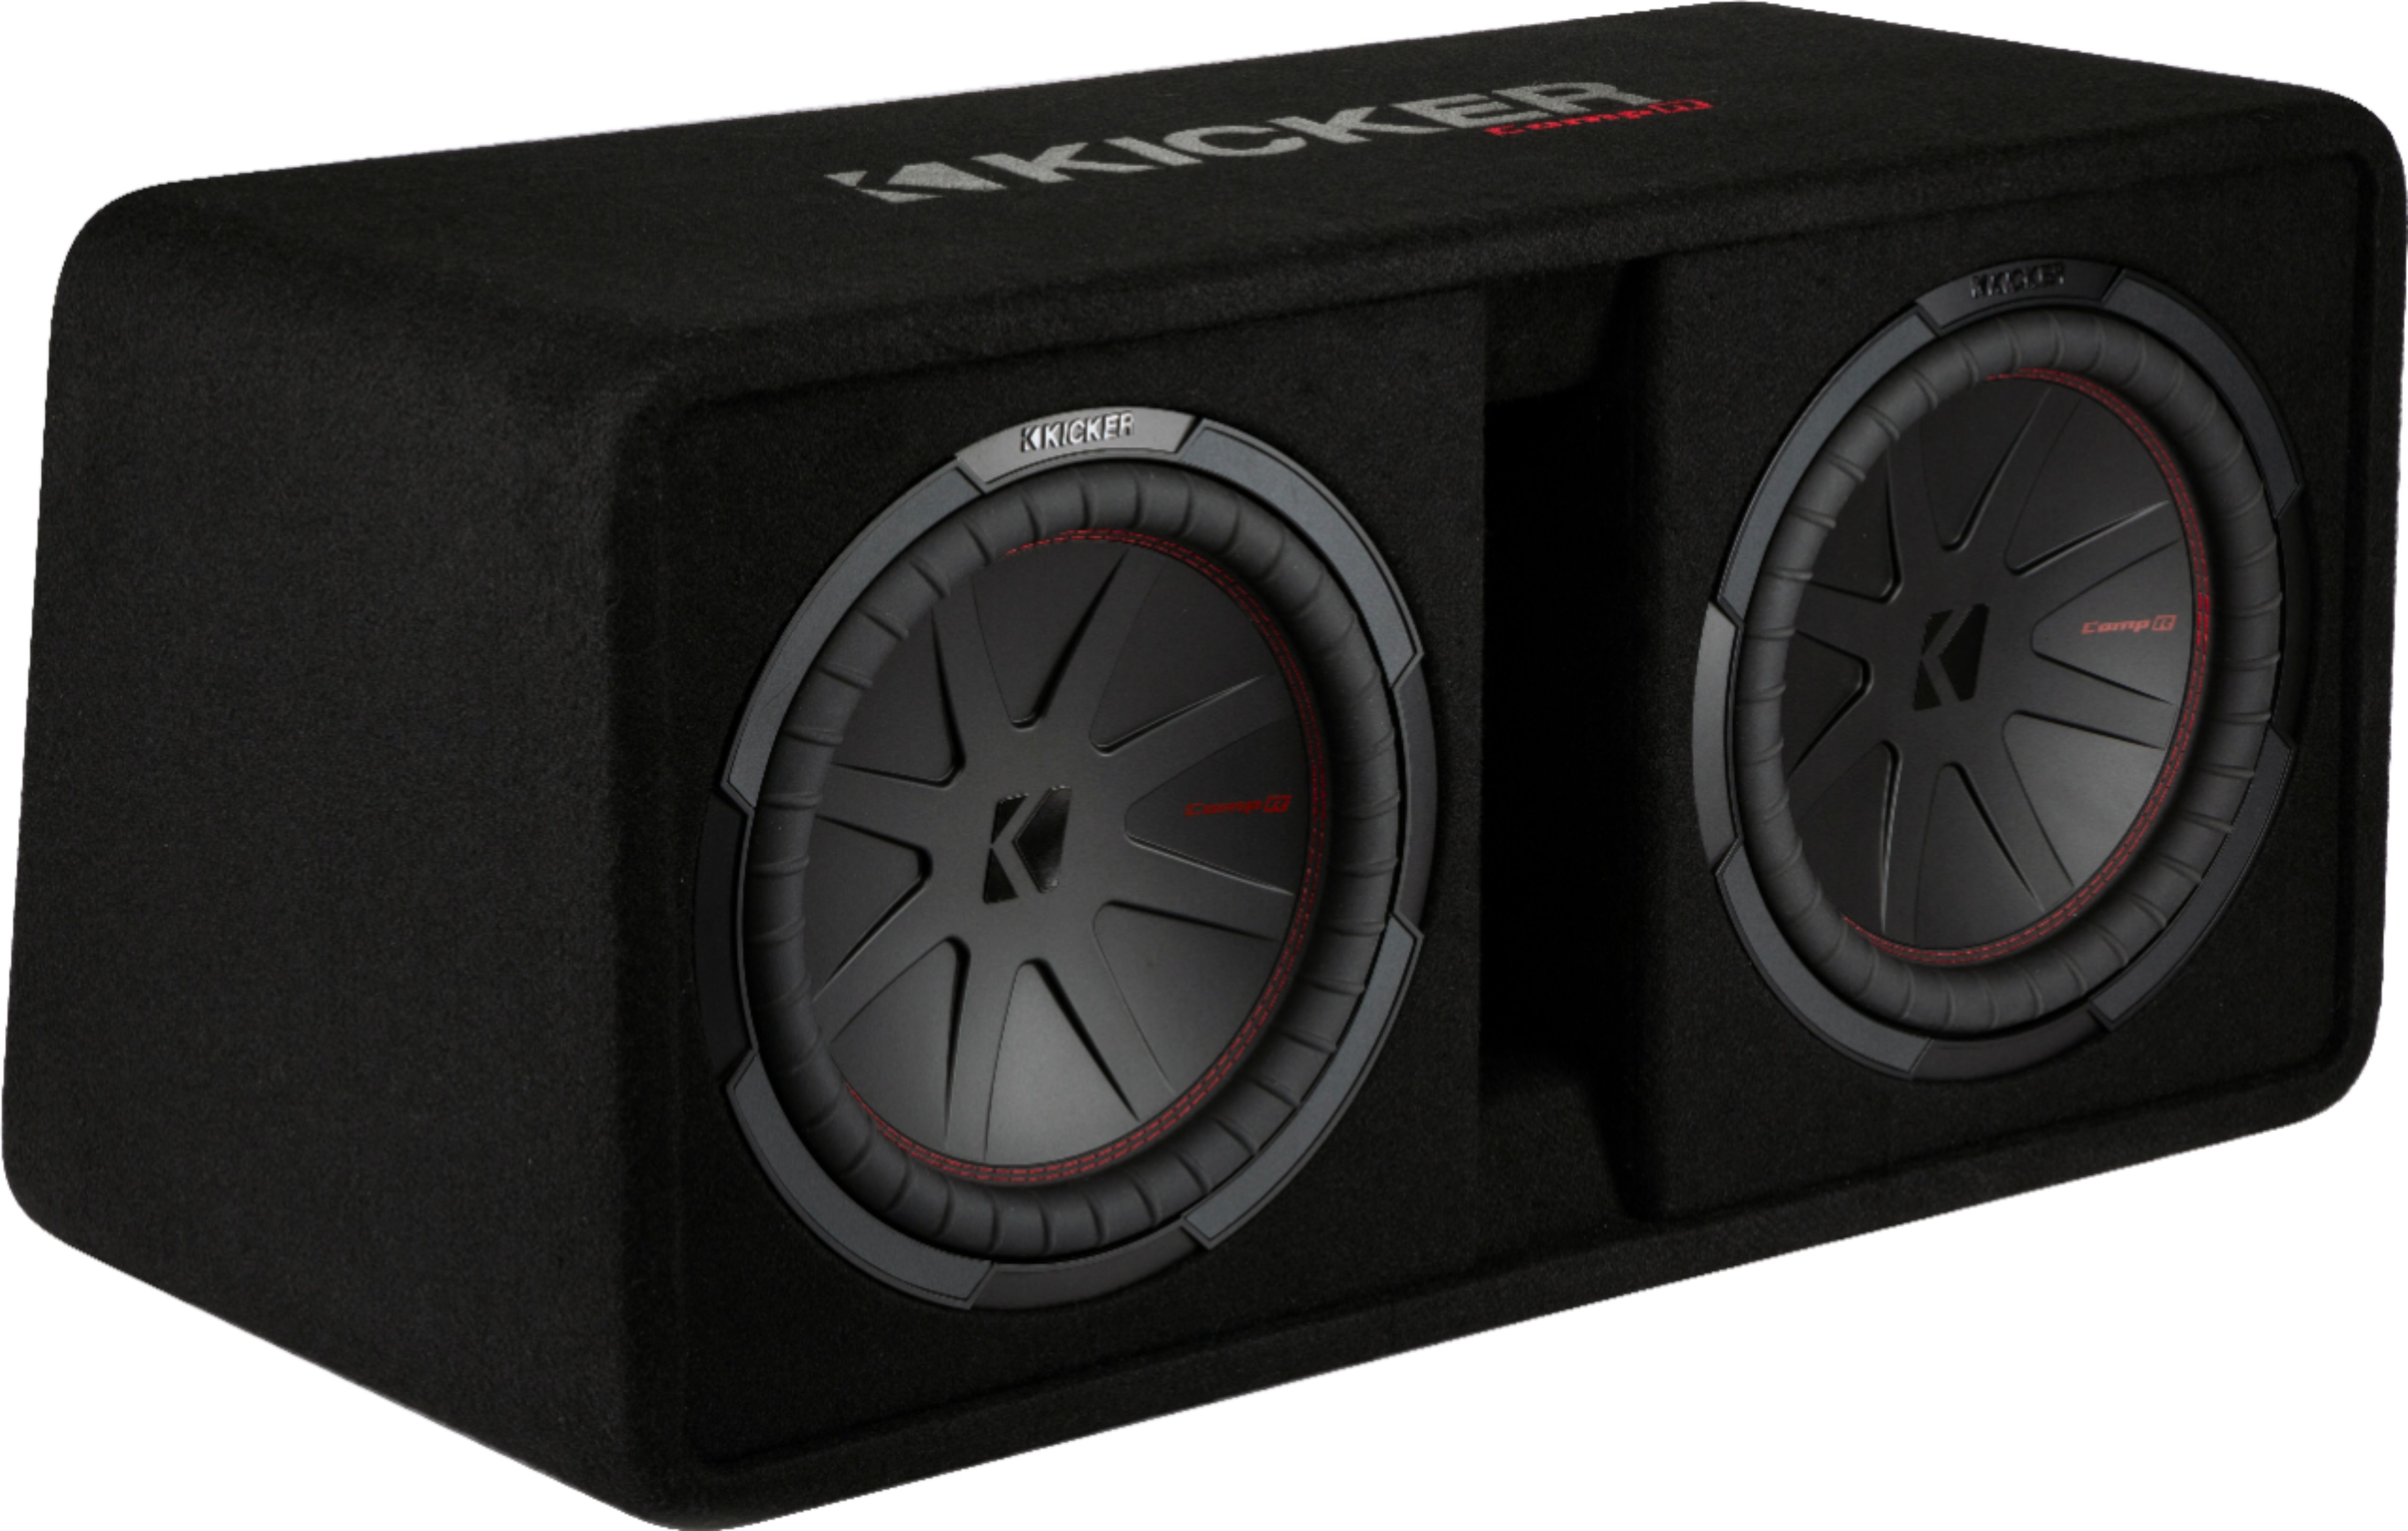 Angle View: KICKER - CompR Dual 12" Dual-Voice-Coil 2-Ohm Subwoofers with Enclosure - Black